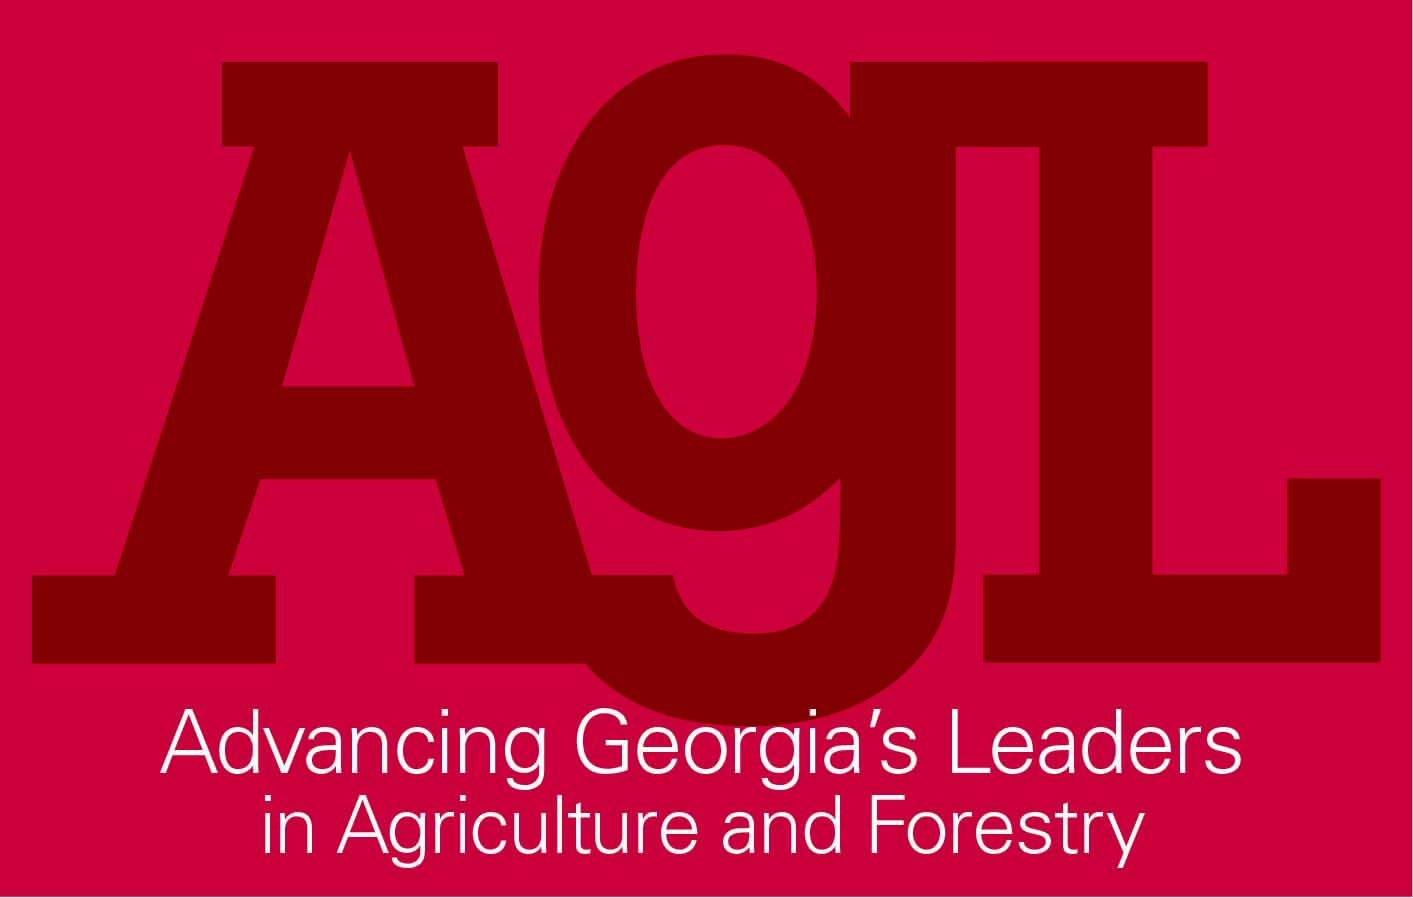 Representing a broad cross section of corporations, businesses and organizations throughout Georgia, 25 professionals have been chosen to participate in the Advancing Georgia's Leaders in Agriculture and Forestry (AGL) 2015-2017 class.